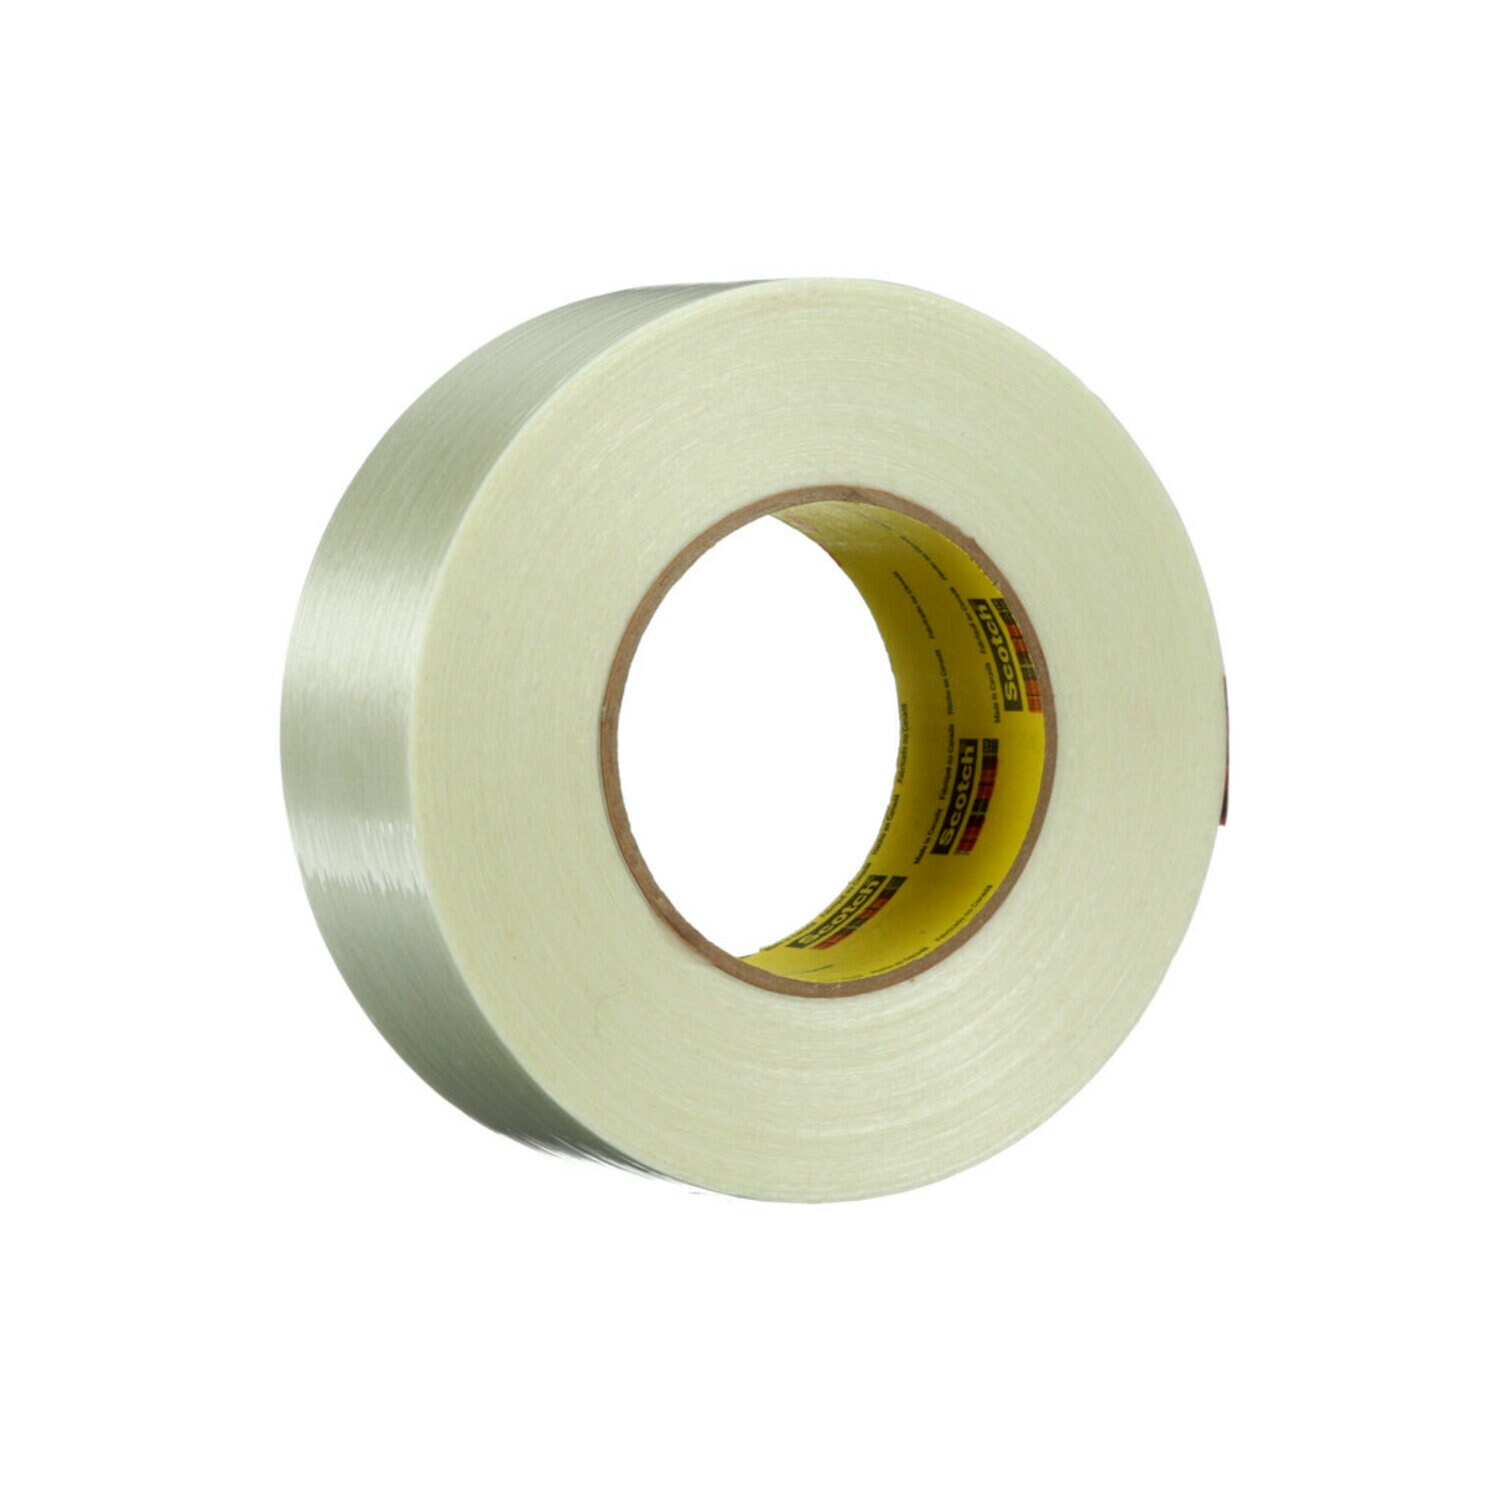 https://www.e-aircraftsupply.com/ItemImages/28/1289543E_scotch-high-strength-filament-tape-890rct-clear-8-mil.jpg